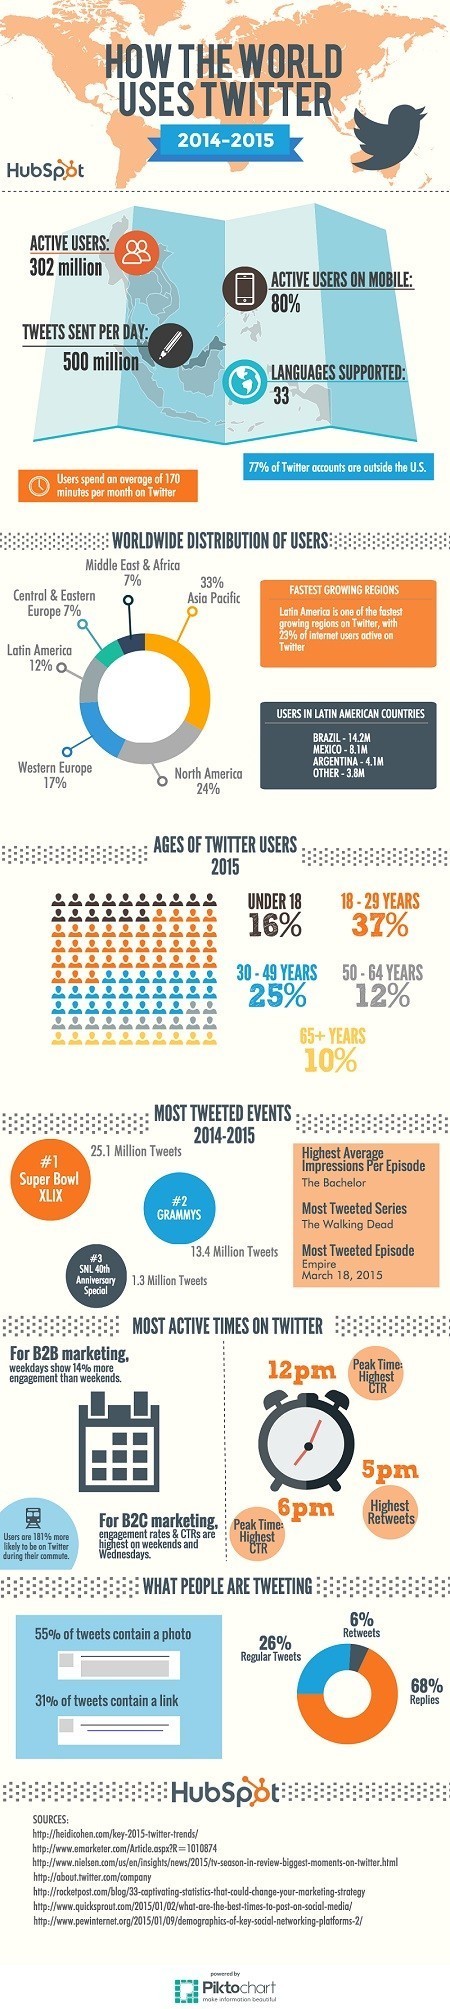 How the World Uses Twitter [Infographic] | Aprendiendo a Distancia | Scoop.it